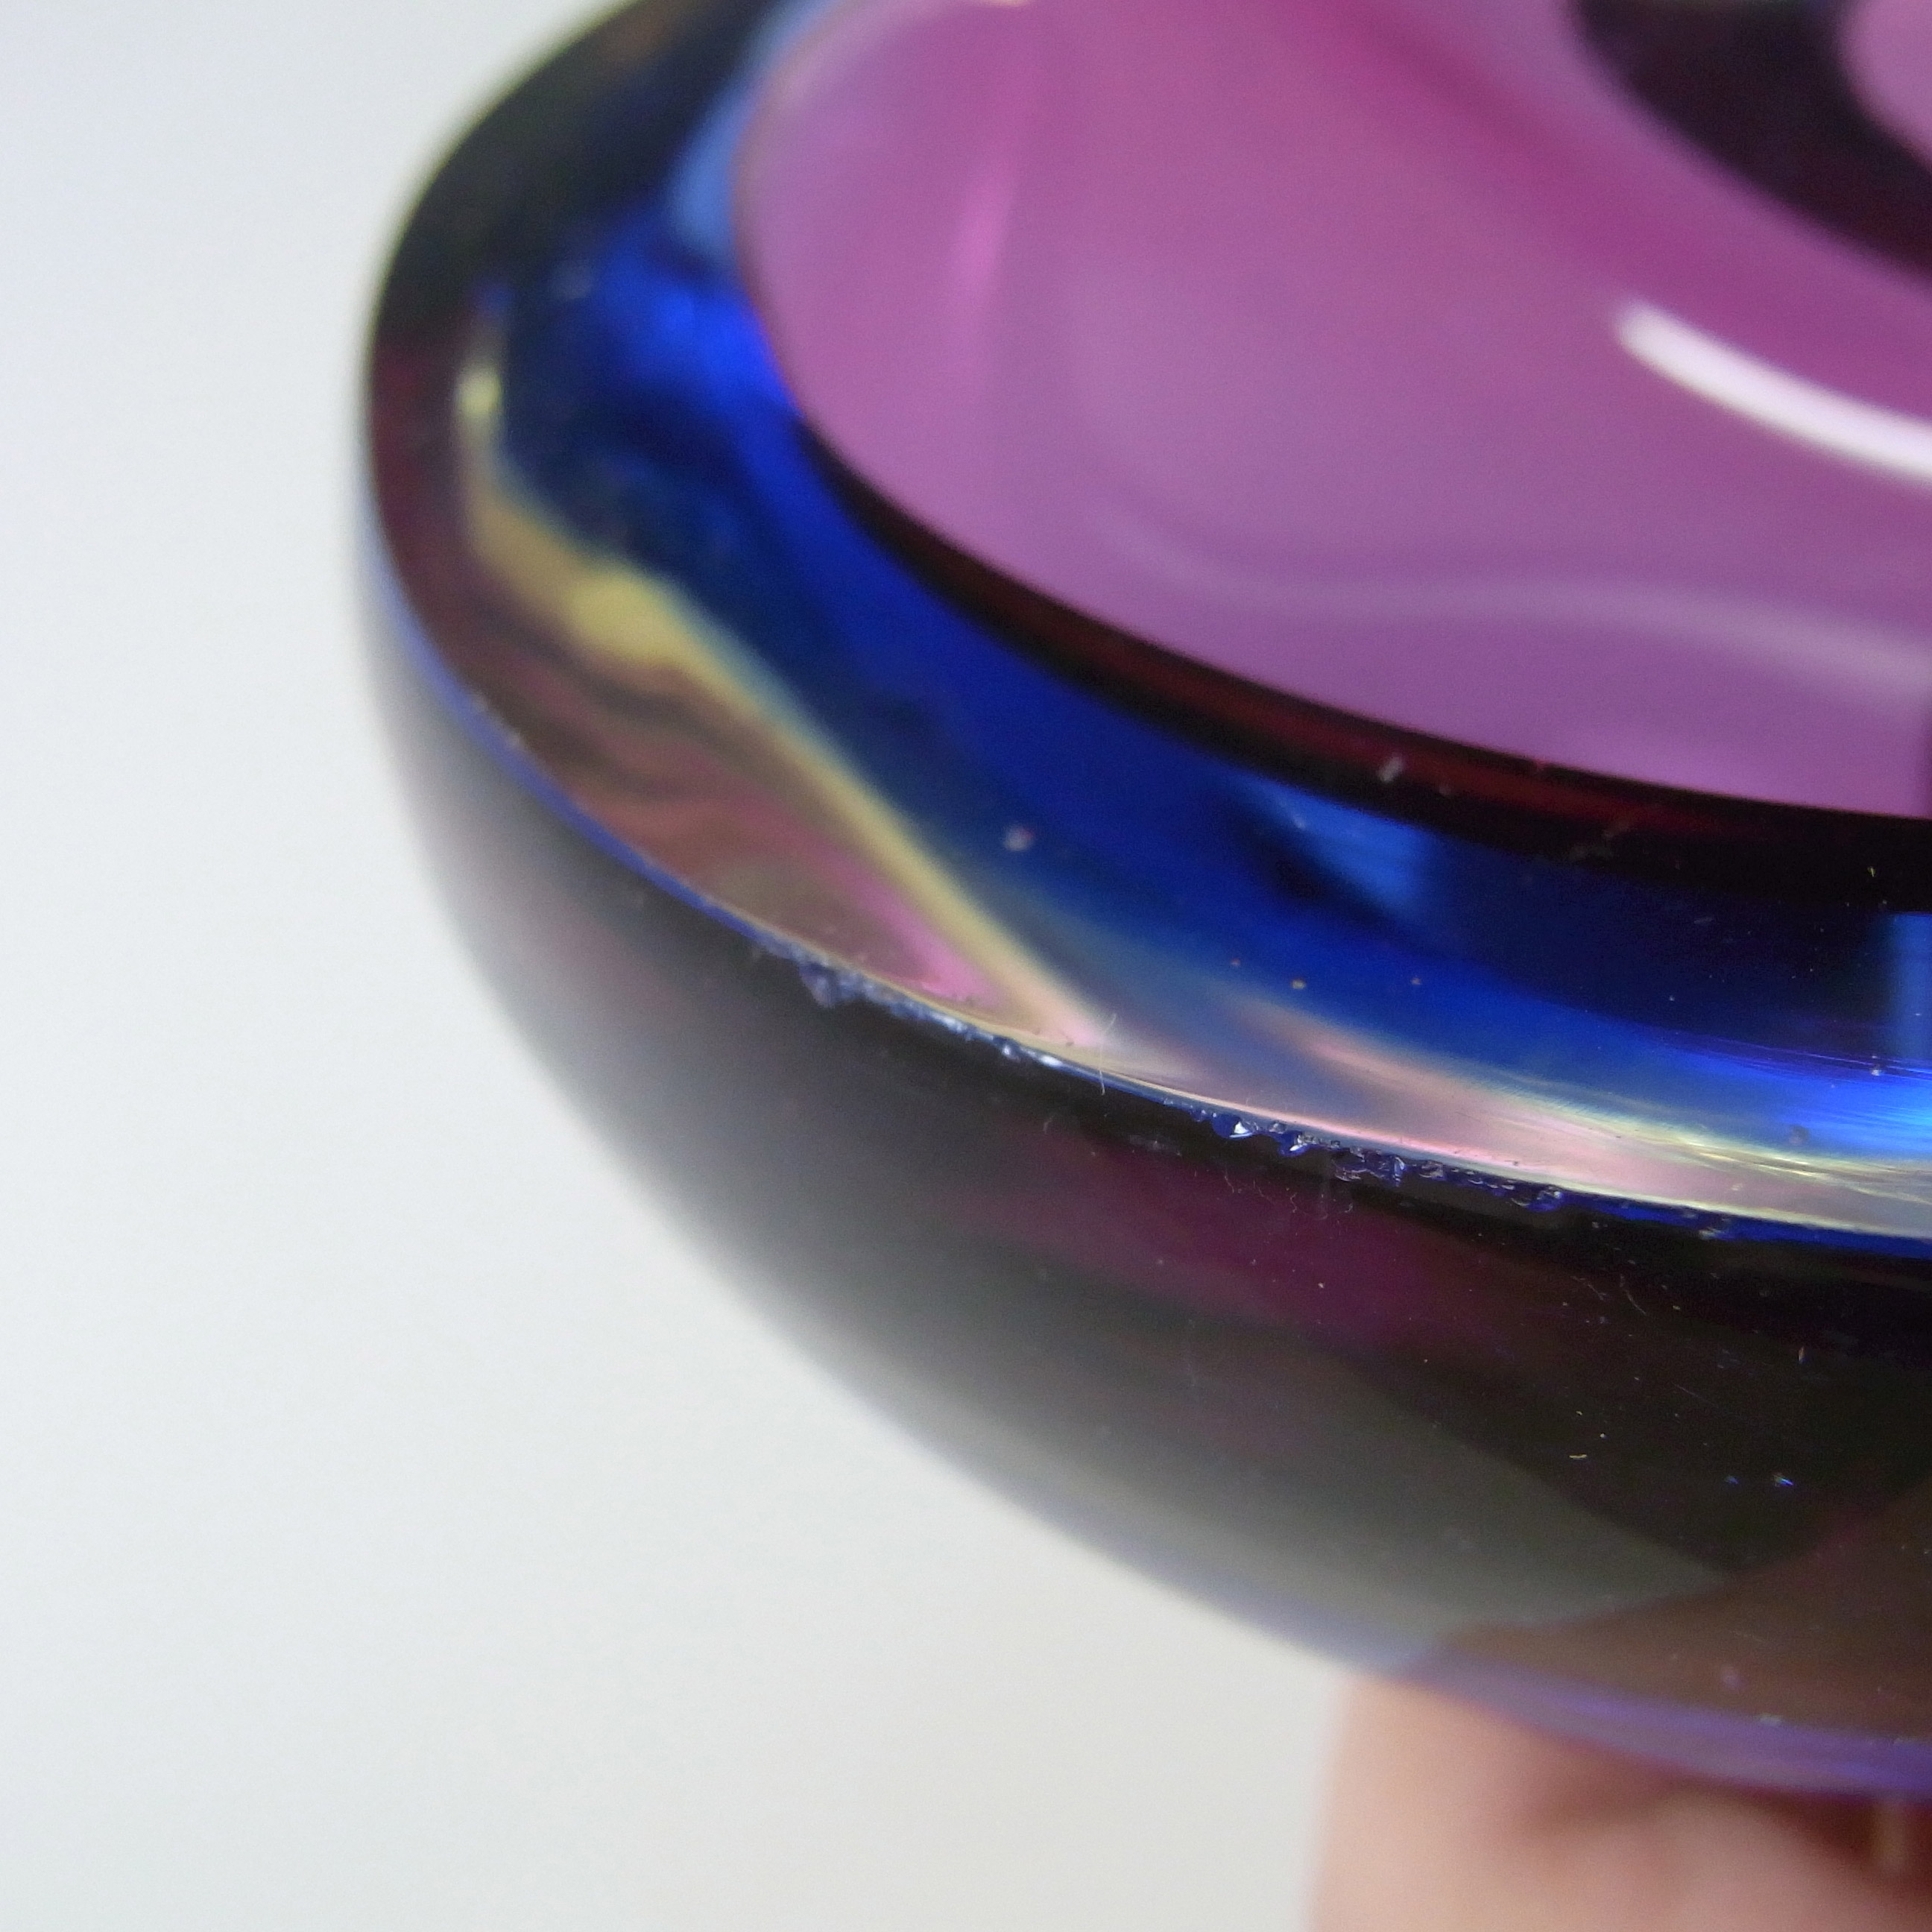 Murano Geode Purple & Blue Sommerso Glass Kidney Bowl - Click Image to Close